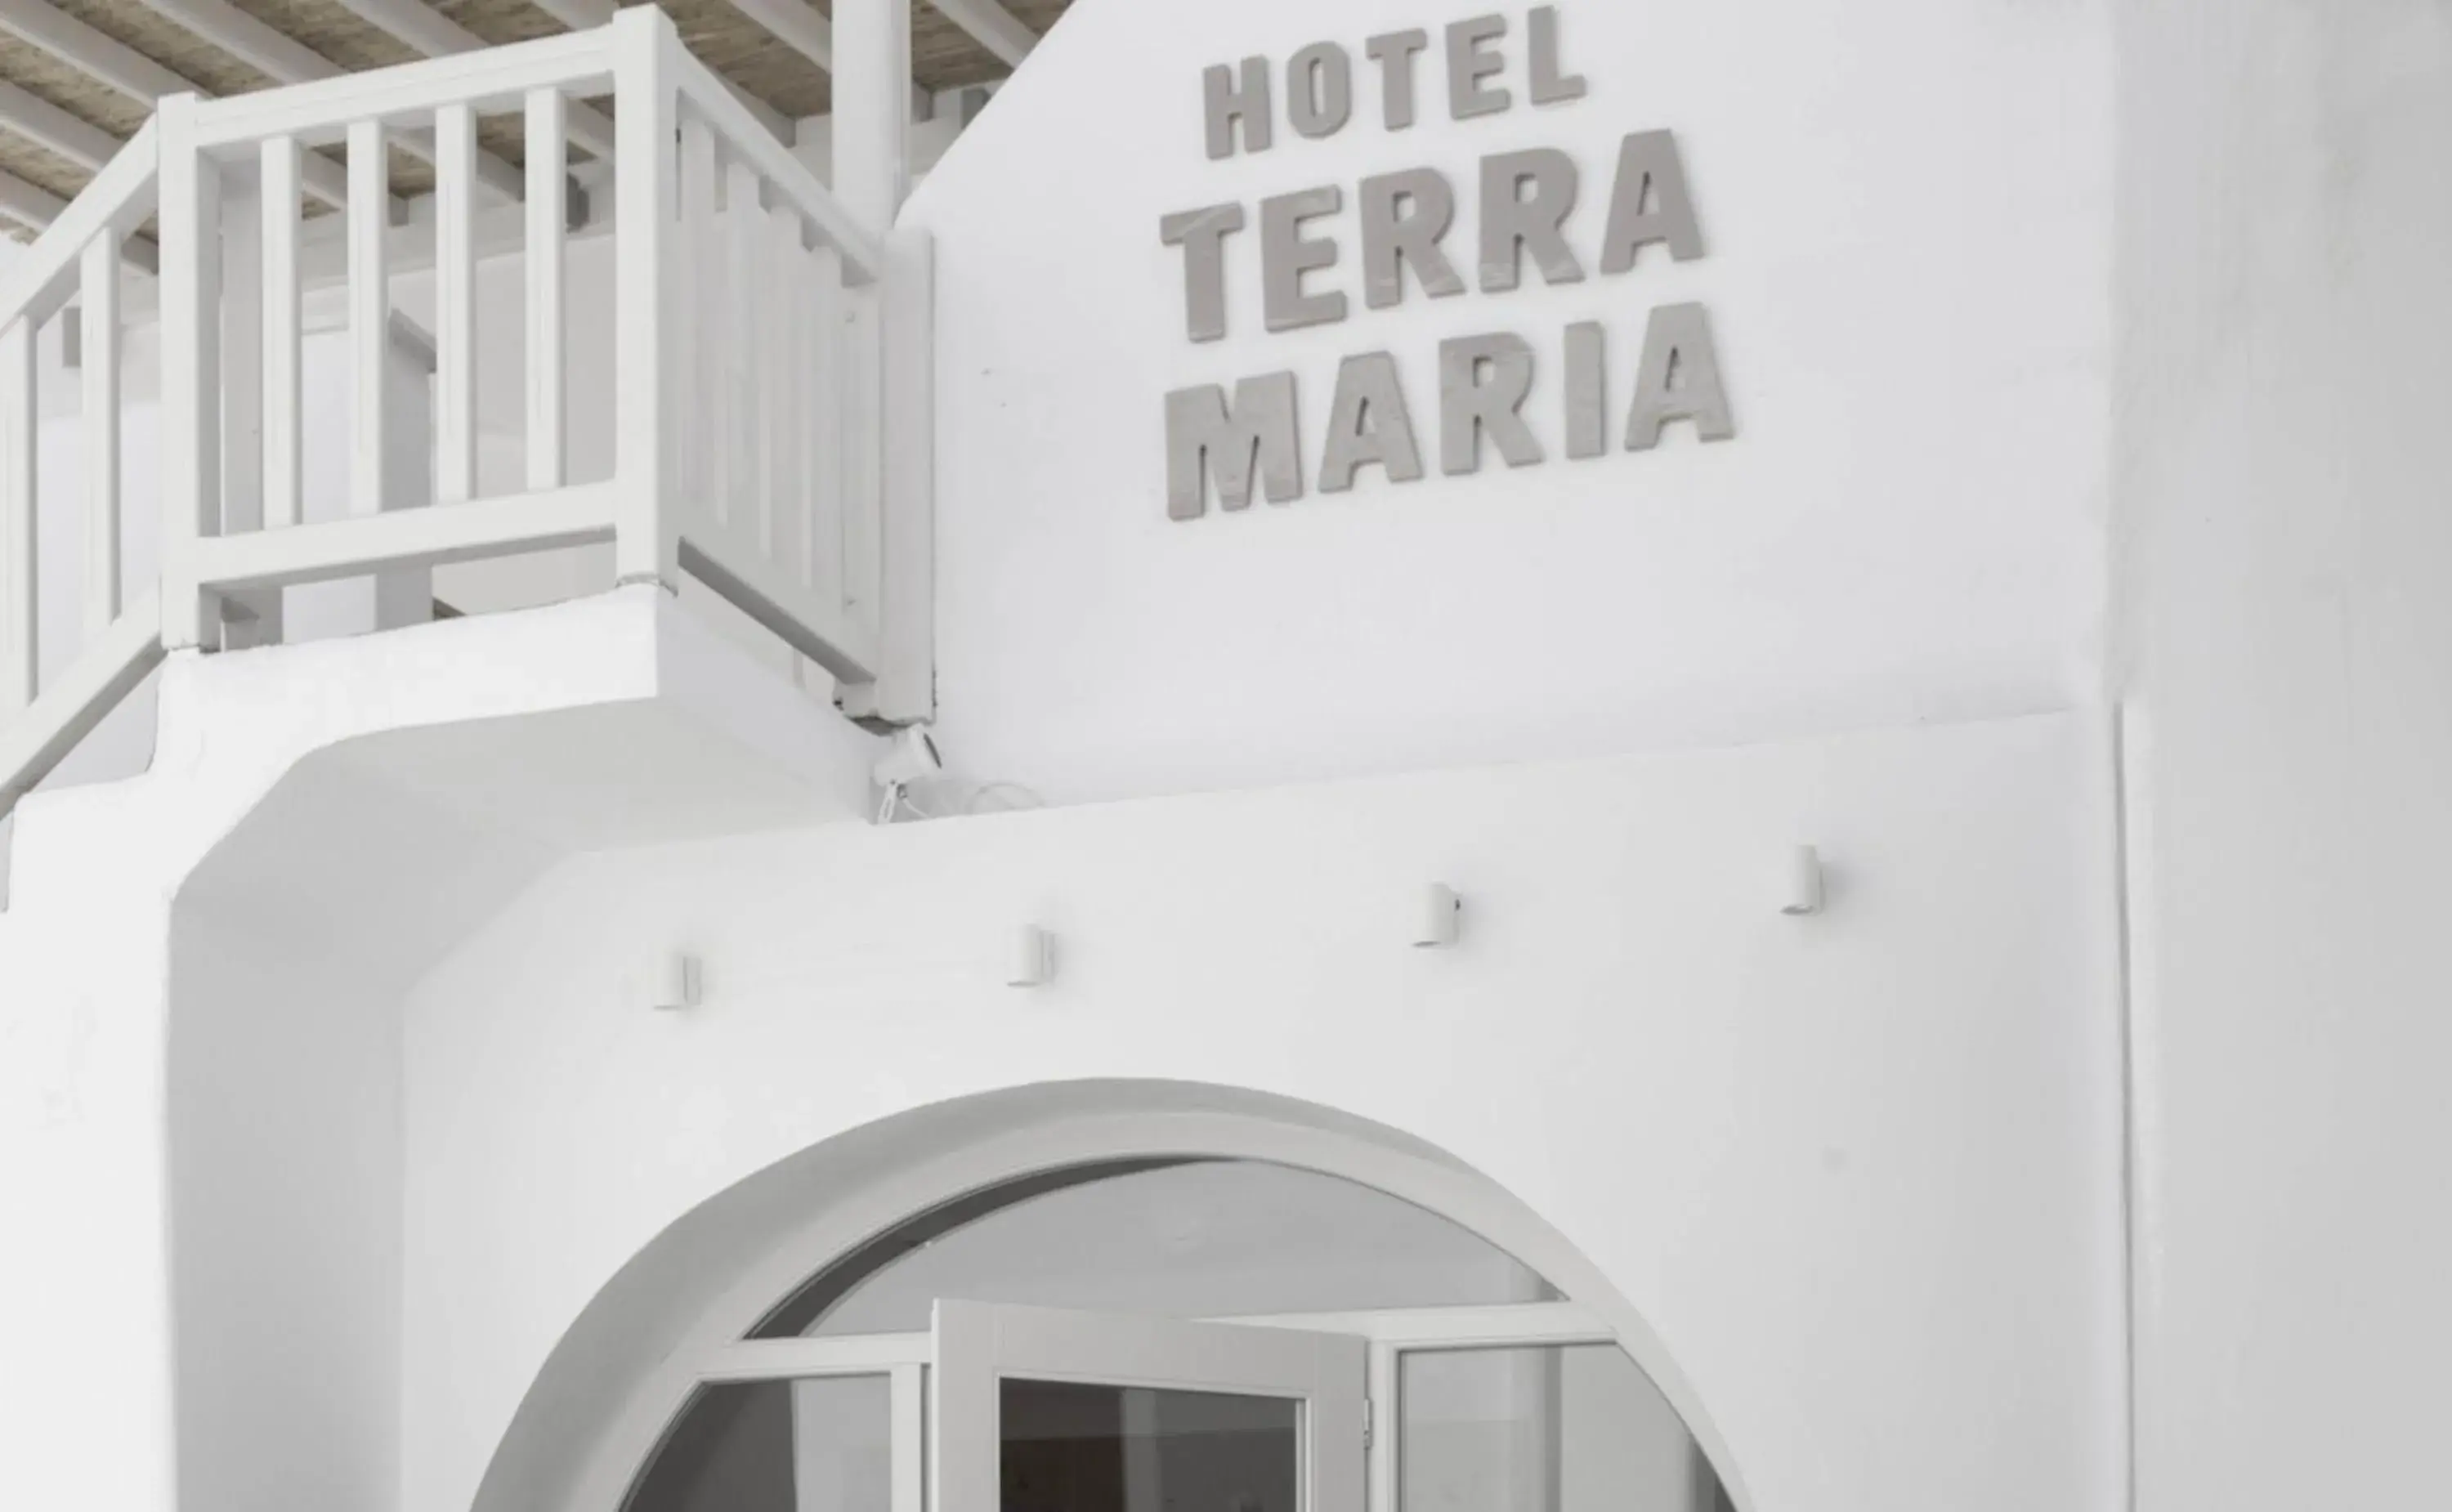 Property logo or sign, Property Building in Terra Maria Hotel